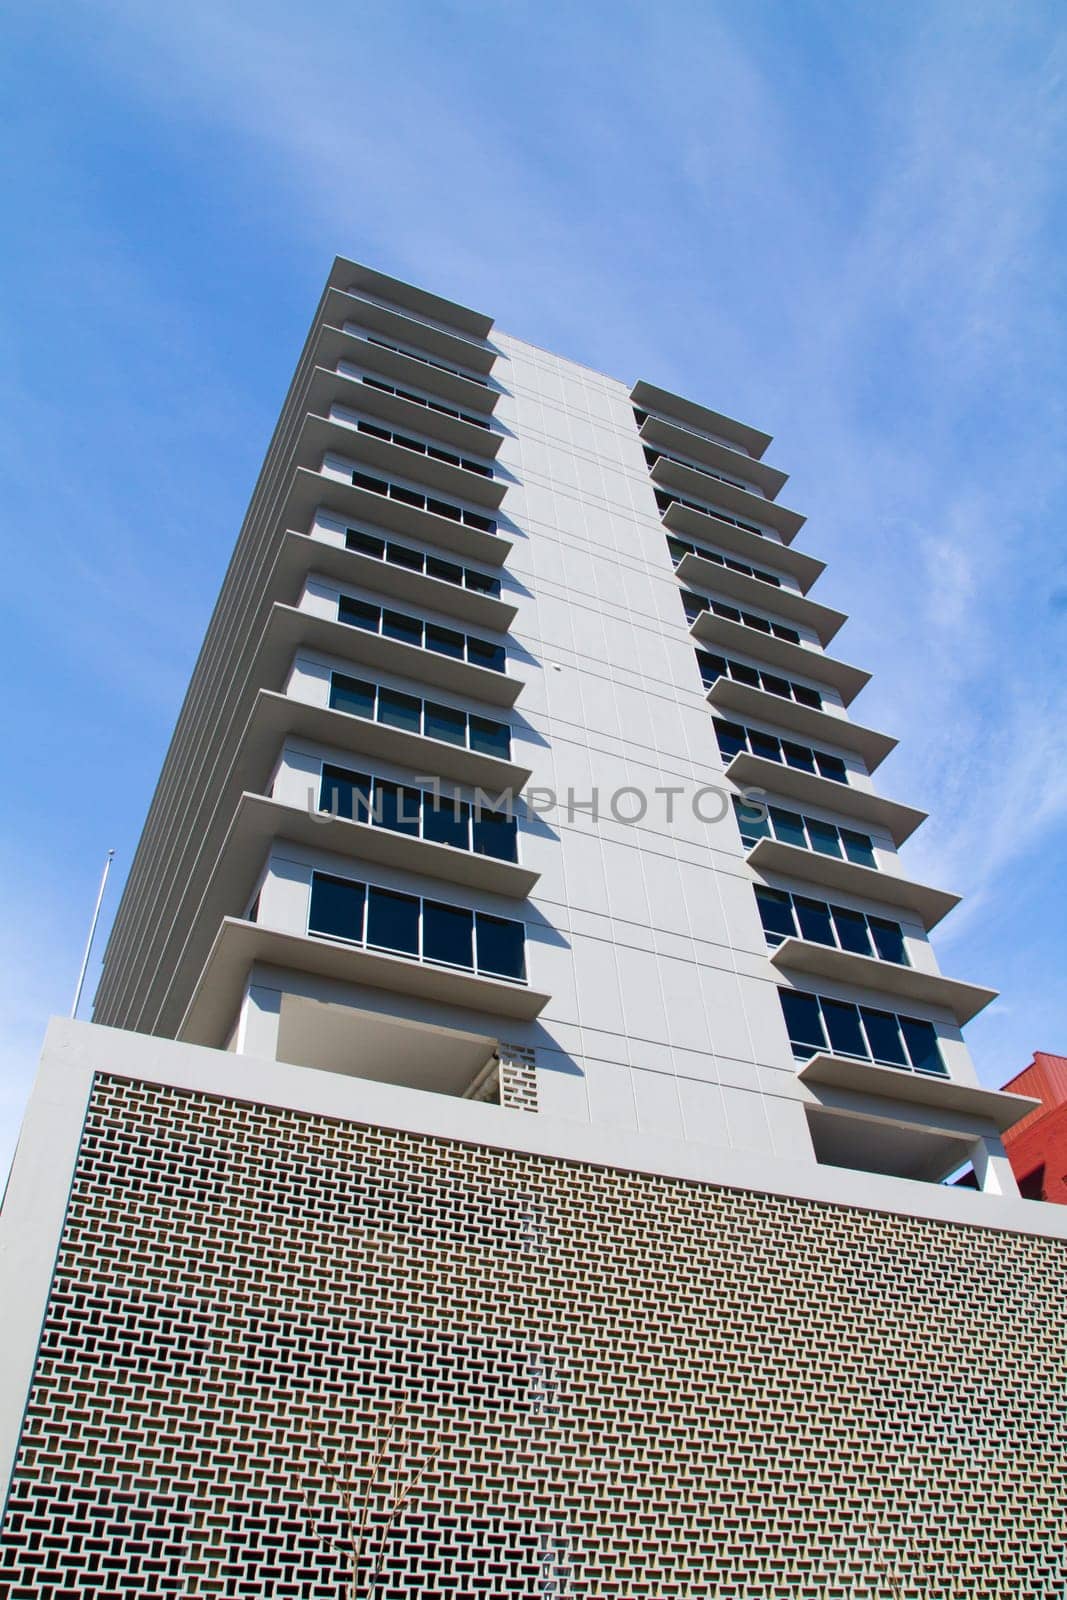 Upward View of Modern High-Rise and Blue Sky in Fort Wayne, Indiana by njproductions